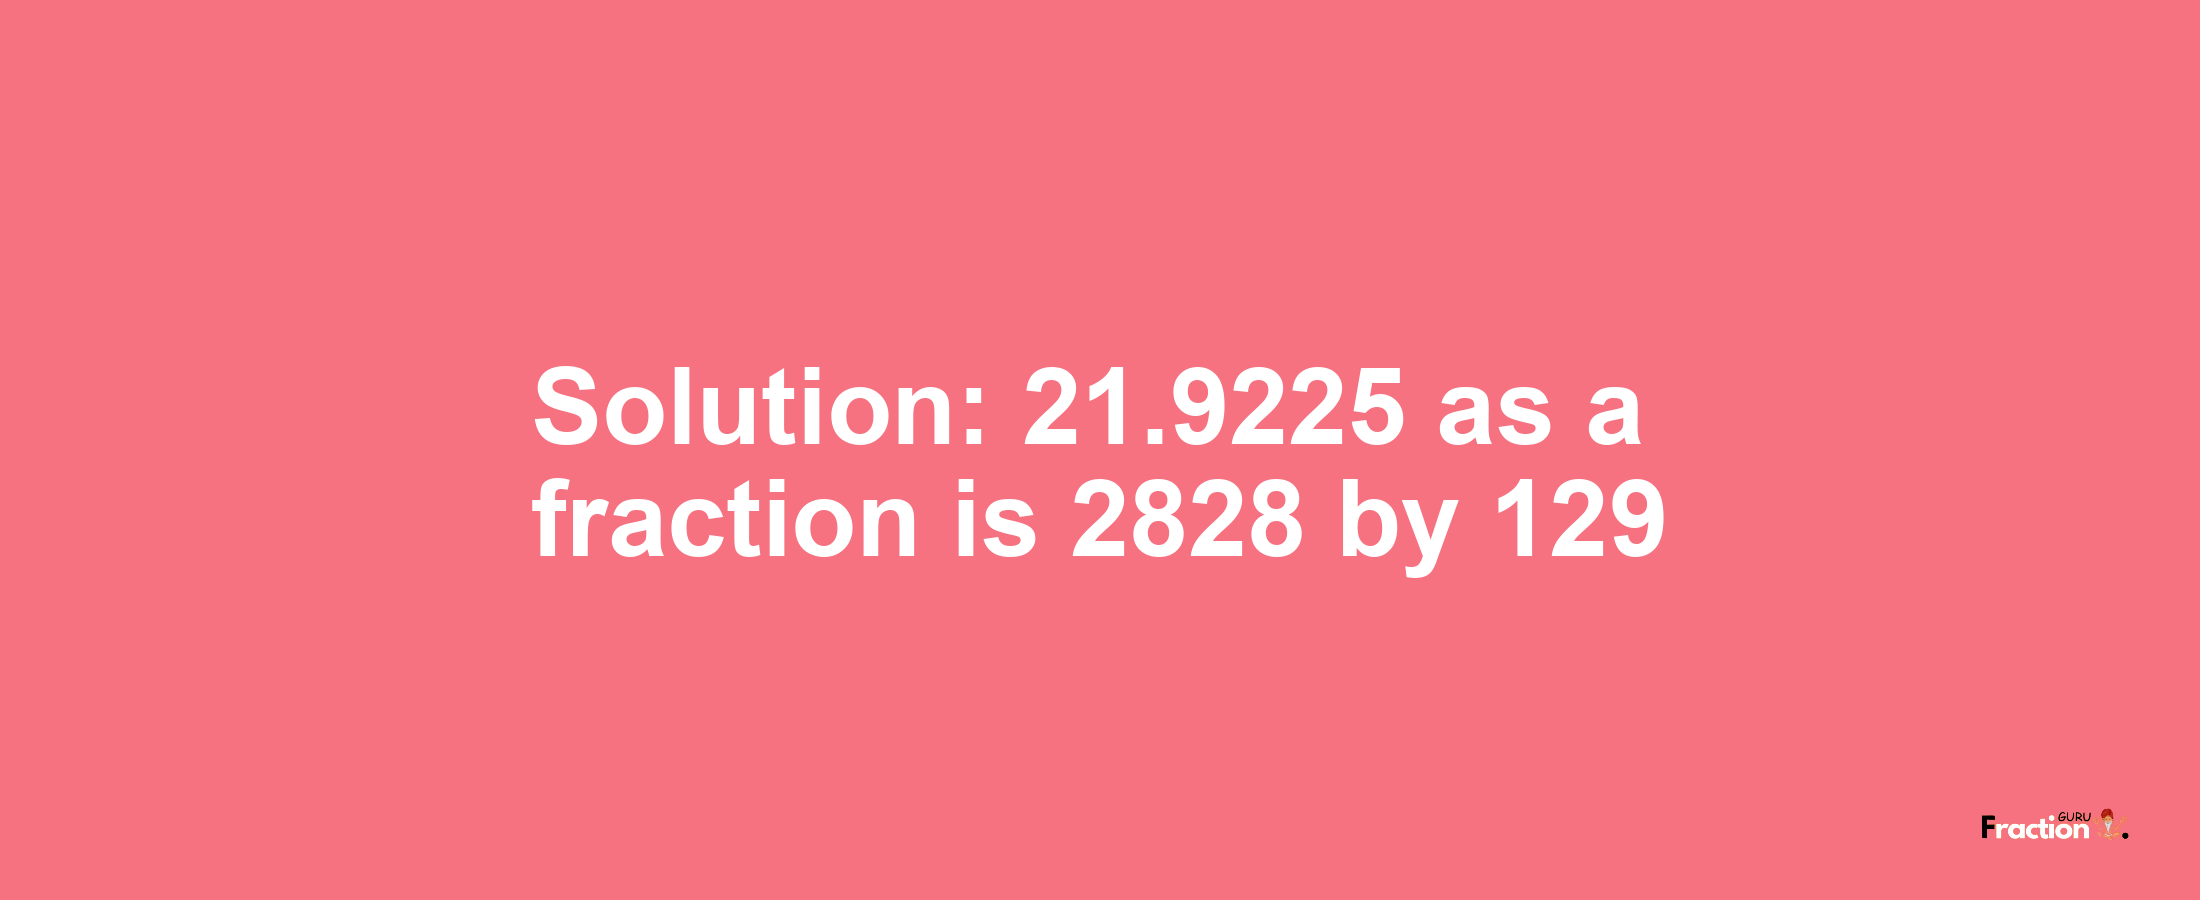 Solution:21.9225 as a fraction is 2828/129